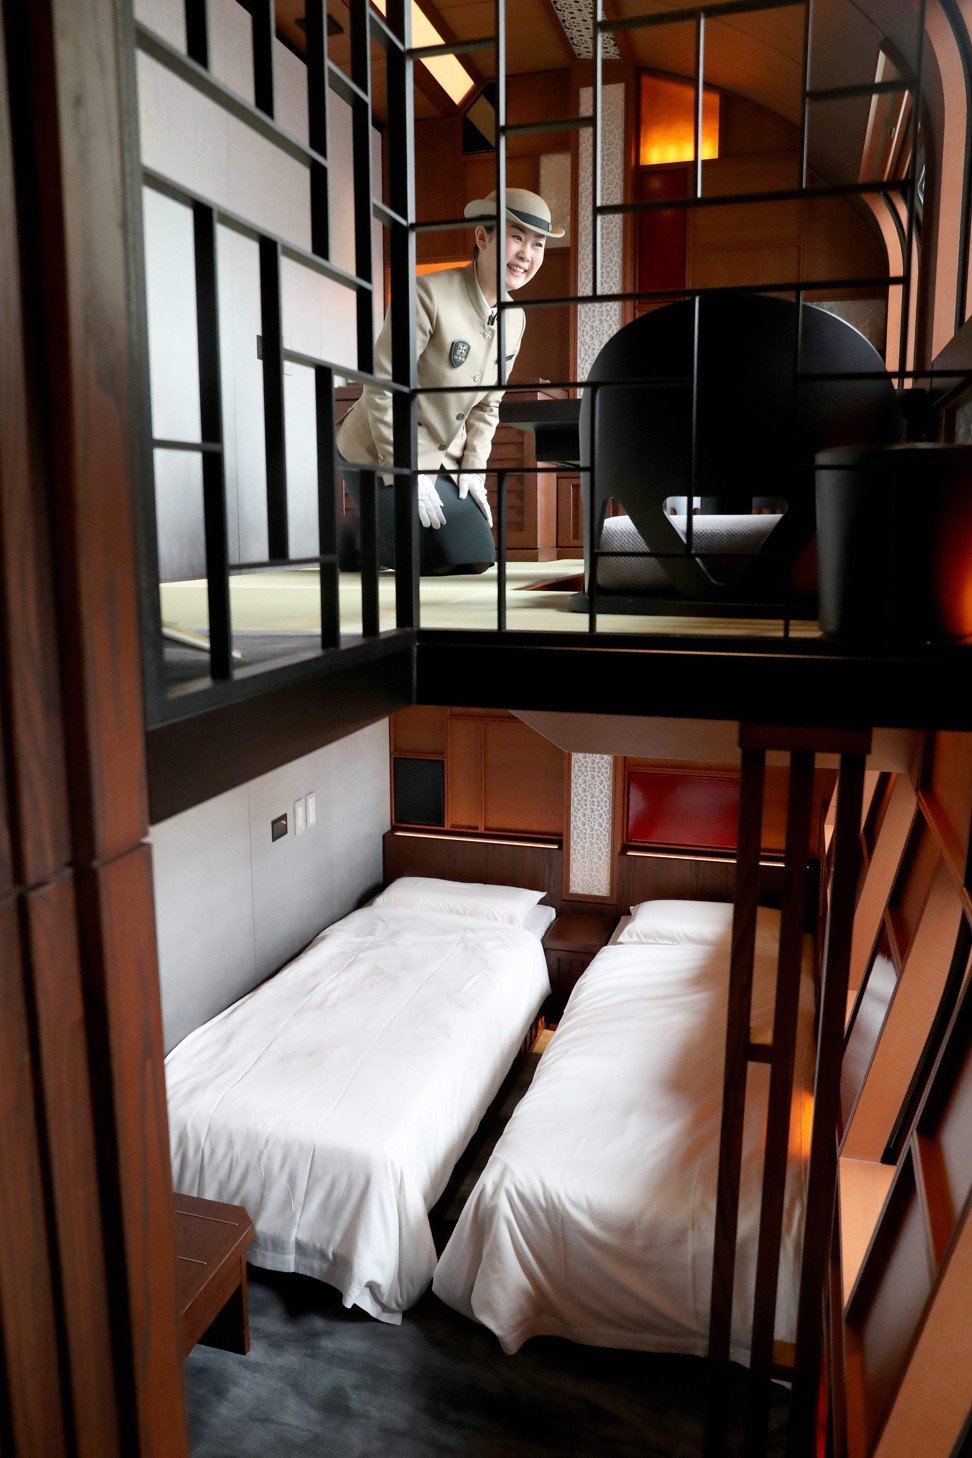 The Shiki-Shima Suite of the Train Suite Shiki-Shima. The train has only 17 cabins, all suites, and the most expensive room, known as Shiki-Shima Suite, is priced at 950,000 yen (US$8,480) per person when shared by two people. Photo: AFP